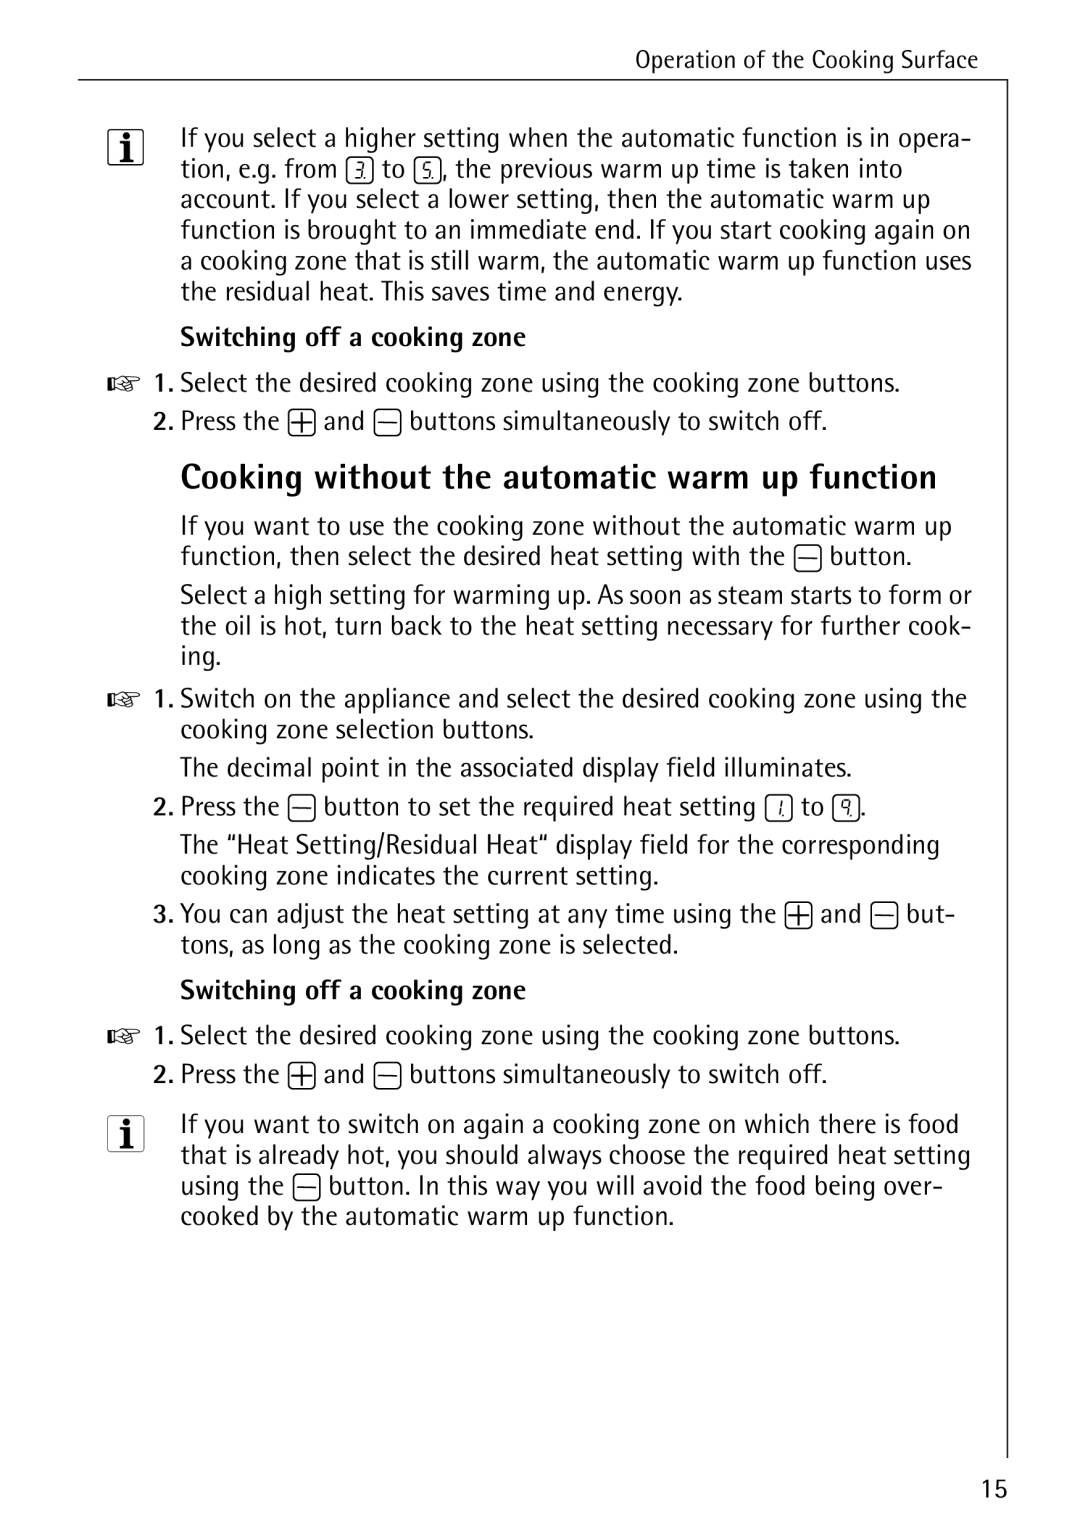 Electrolux 6500 K manual Cooking without the automatic warm up function, Switching off a cooking zone 